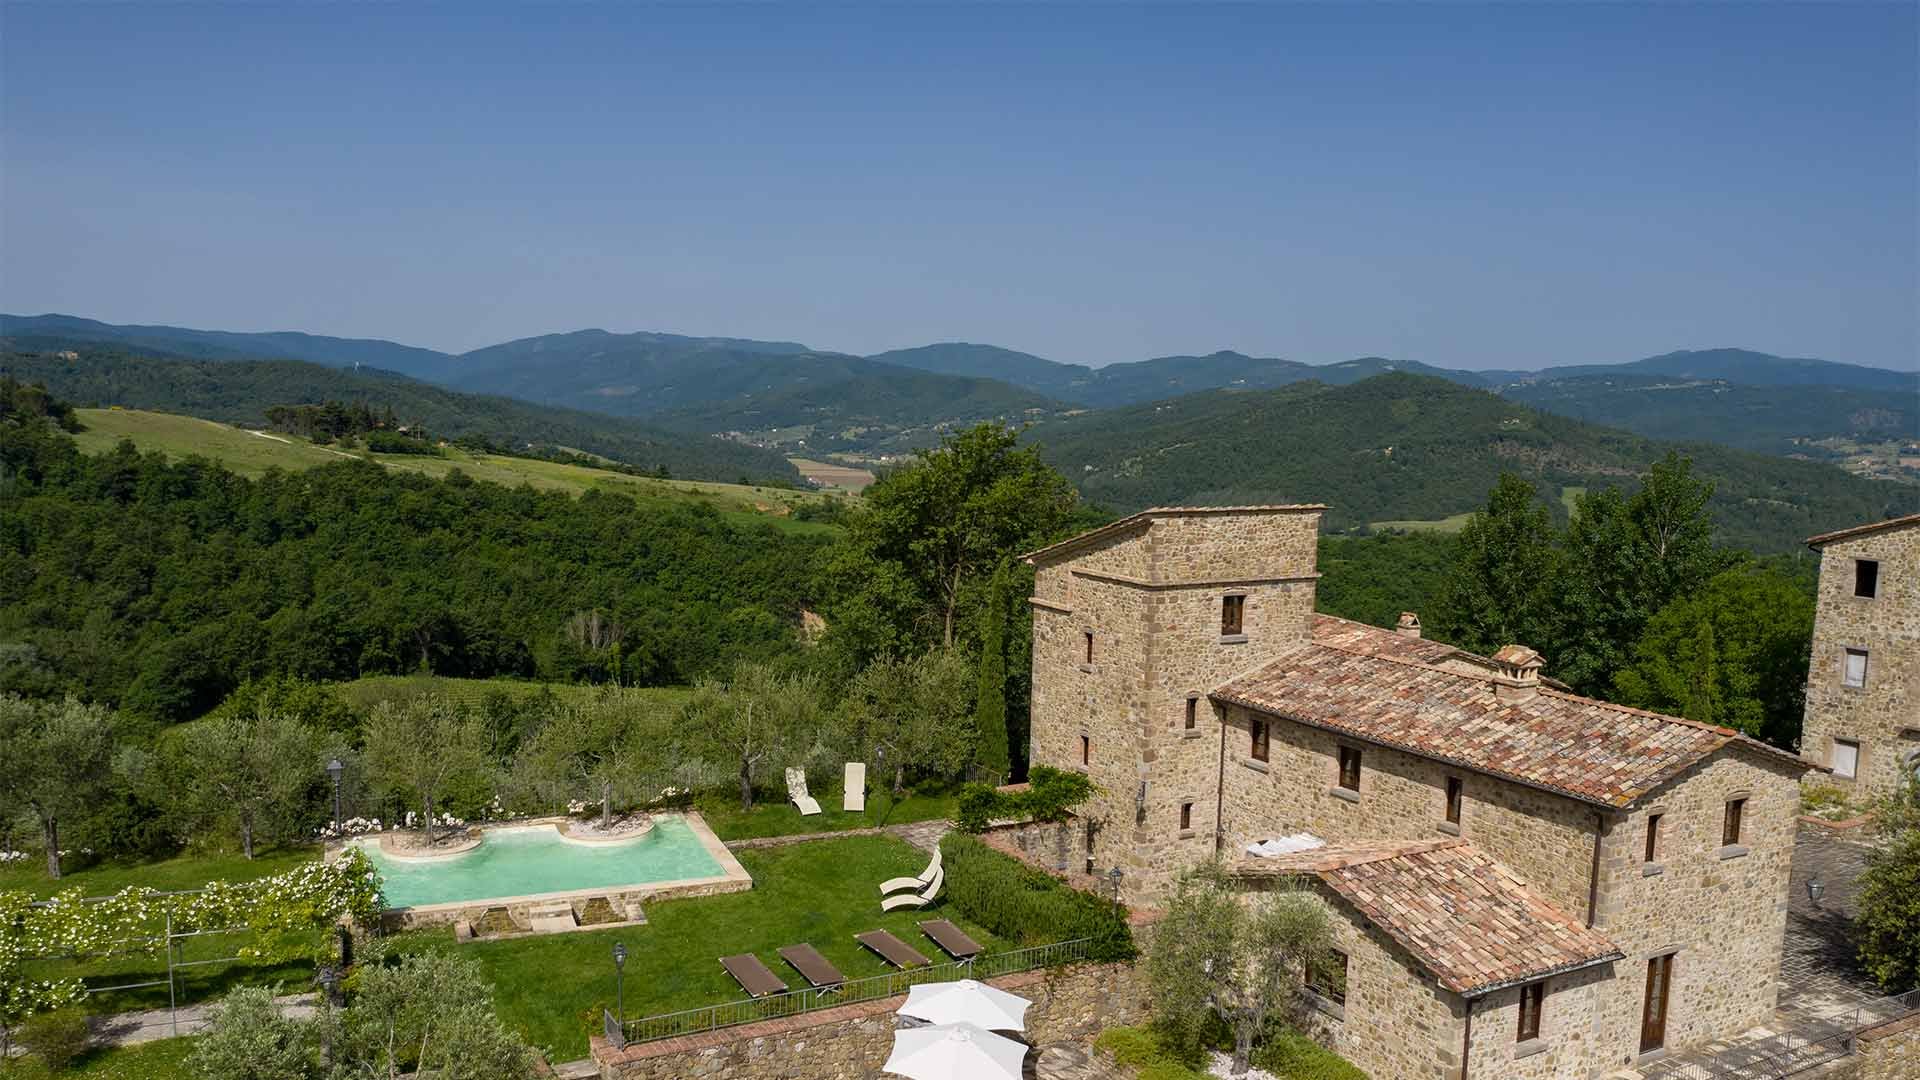 Francis York Ancient Hamlet For Sale Near the Border of Tuscany and Umbria 33.jpg